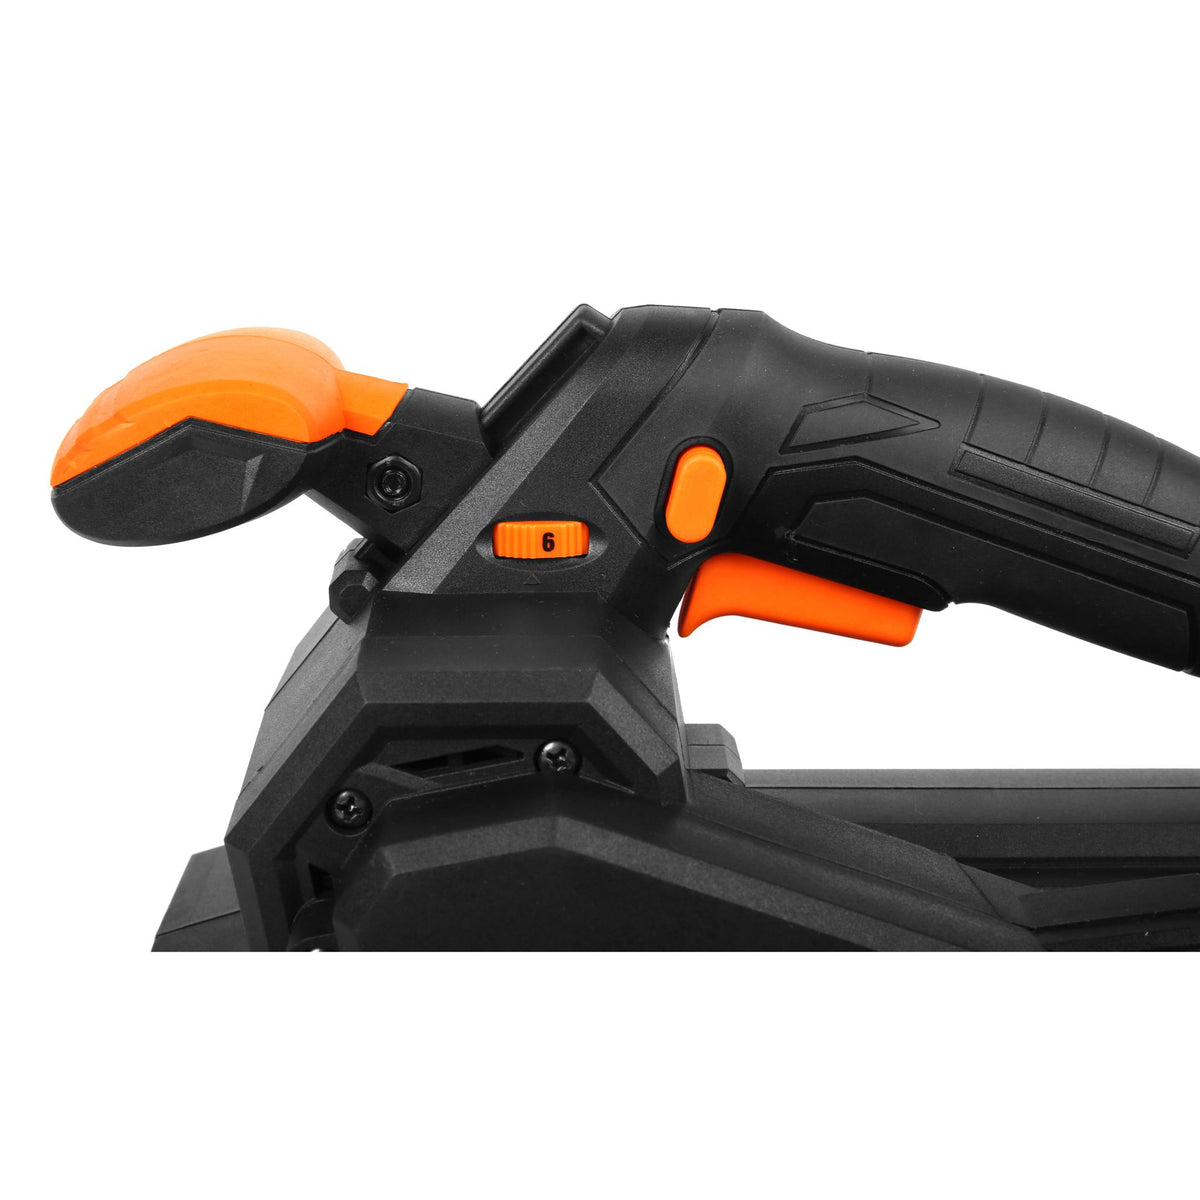 https://www.wenproductsus.shop/wp-content/uploads/1692/52/wen-20418-20v-max-cordless-belt-sander-variable-speed-handheld-and-portable-with-4-0ah-battery-and-charger-wen-visit-our-online-store-we-have-what-youre-looking-for_7.jpg